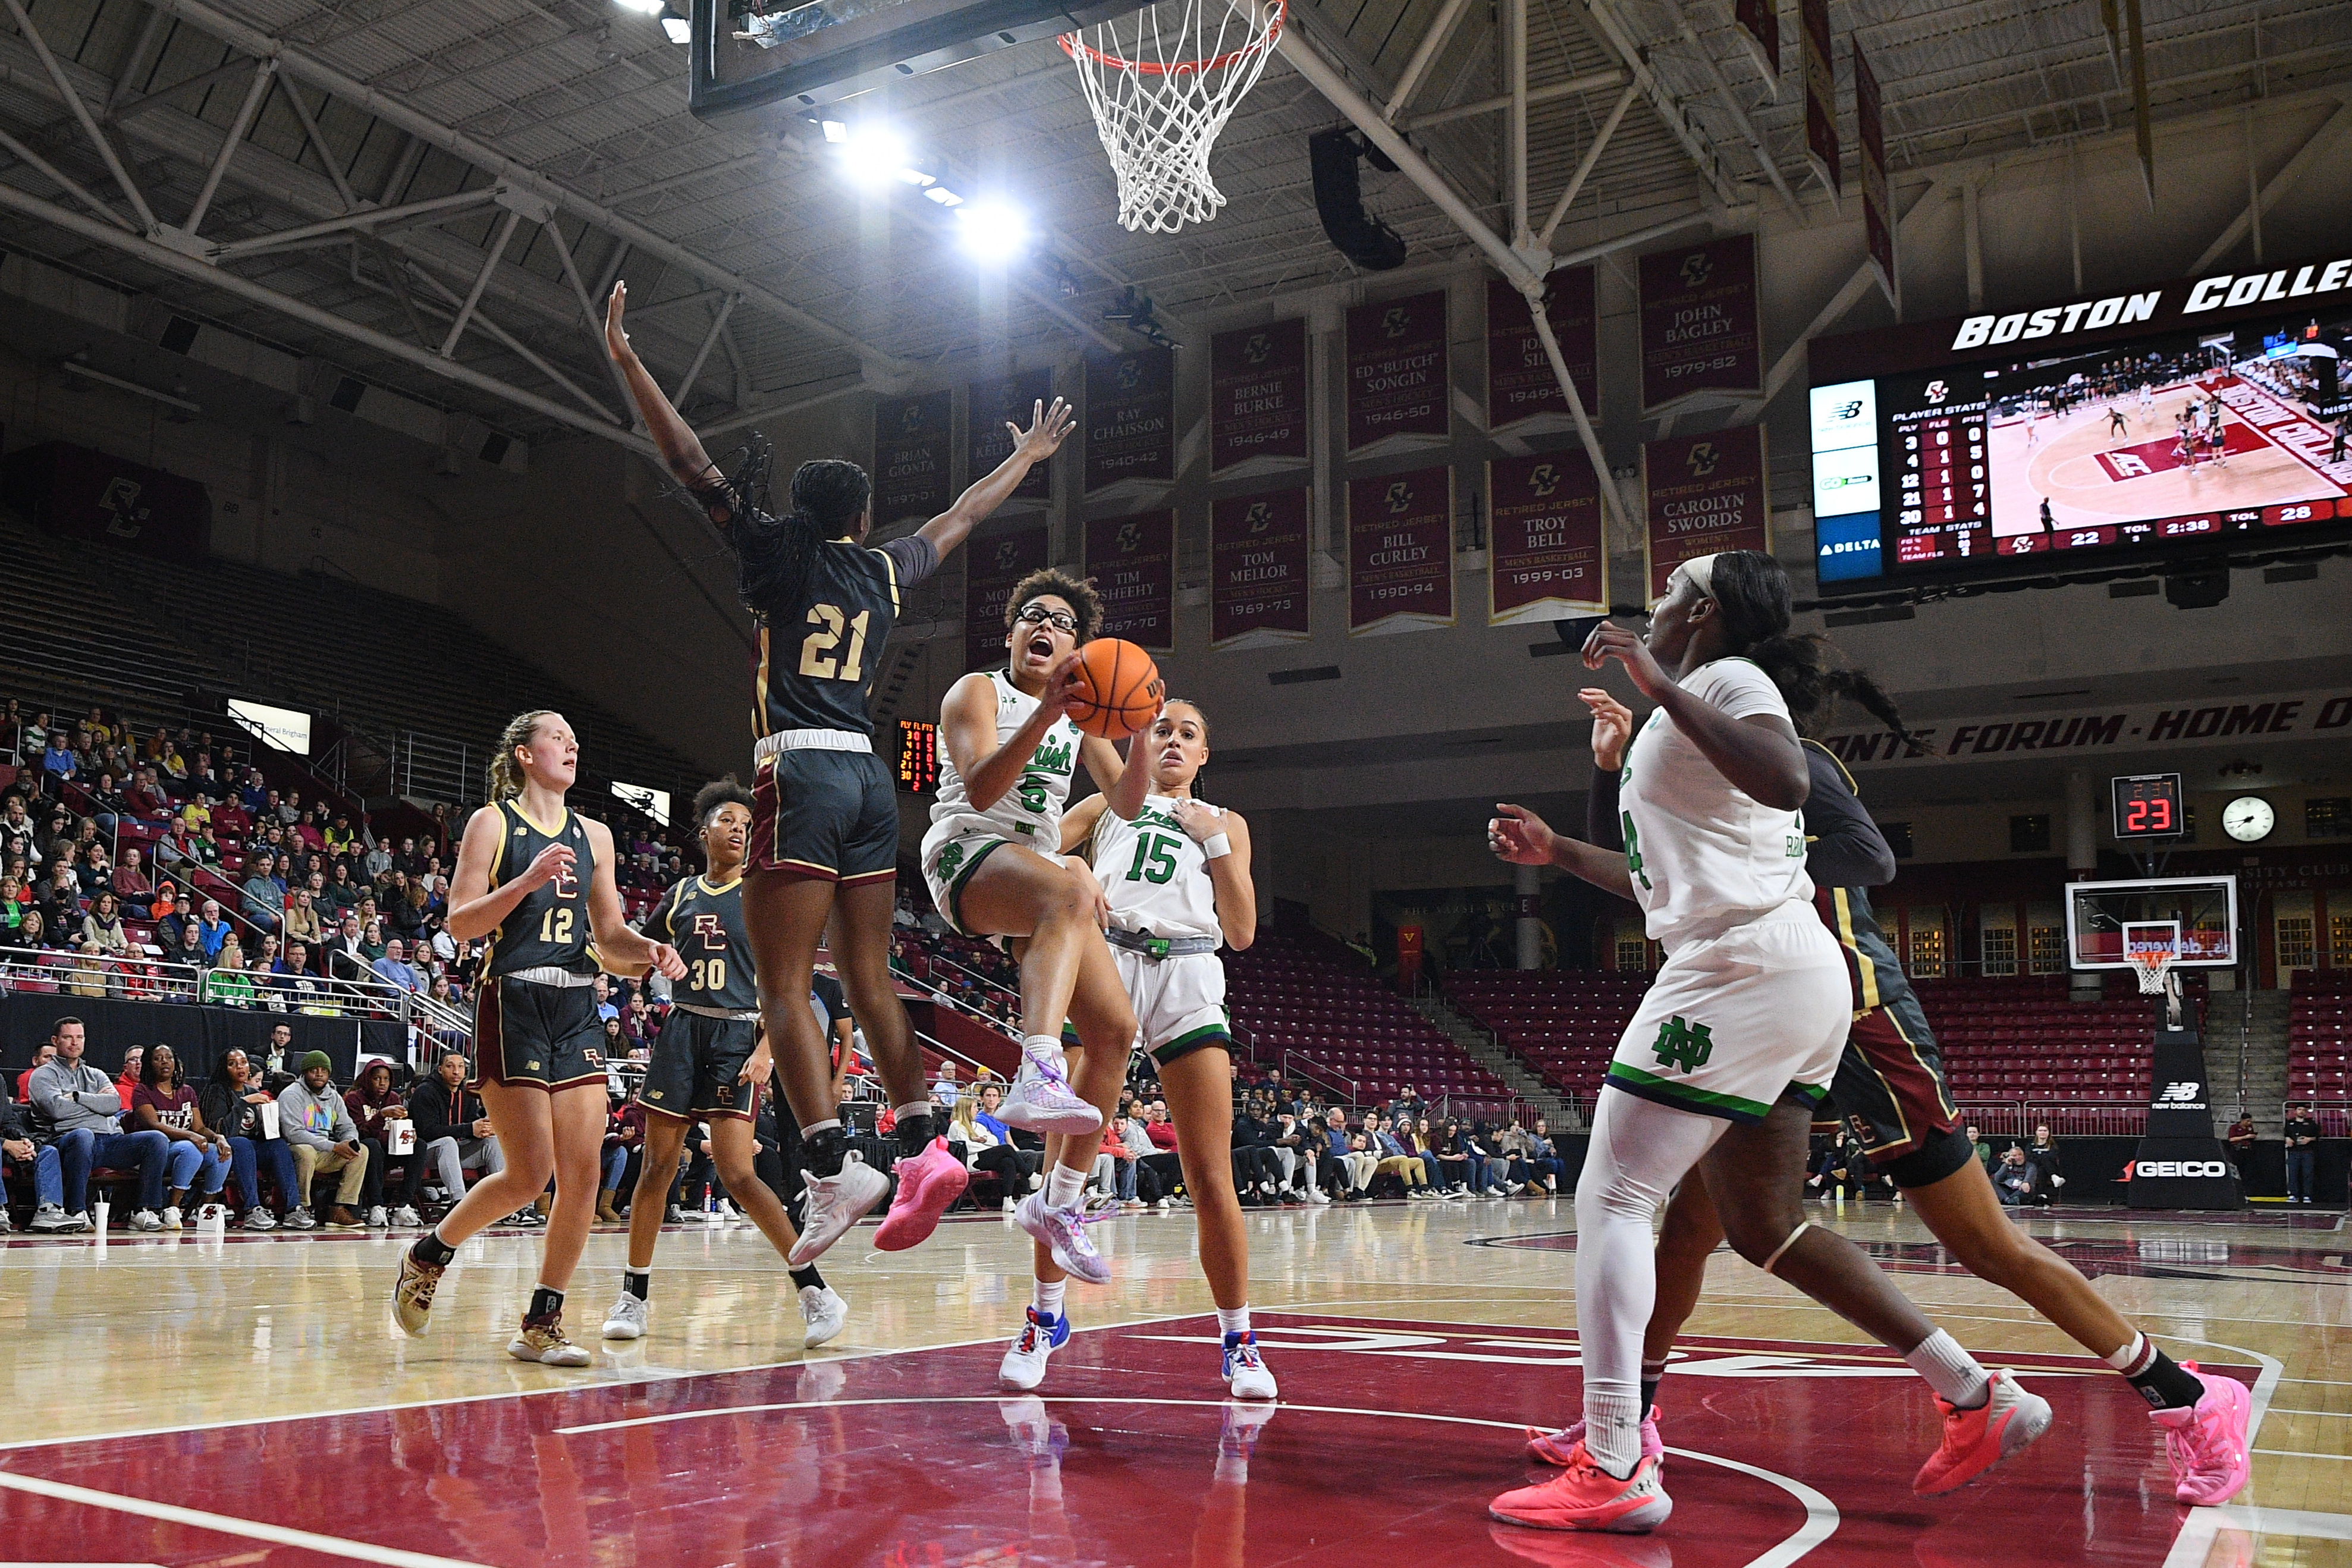 COLLEGE BASKETBALL: FEB 02 Womens Notre Dame at Boston College